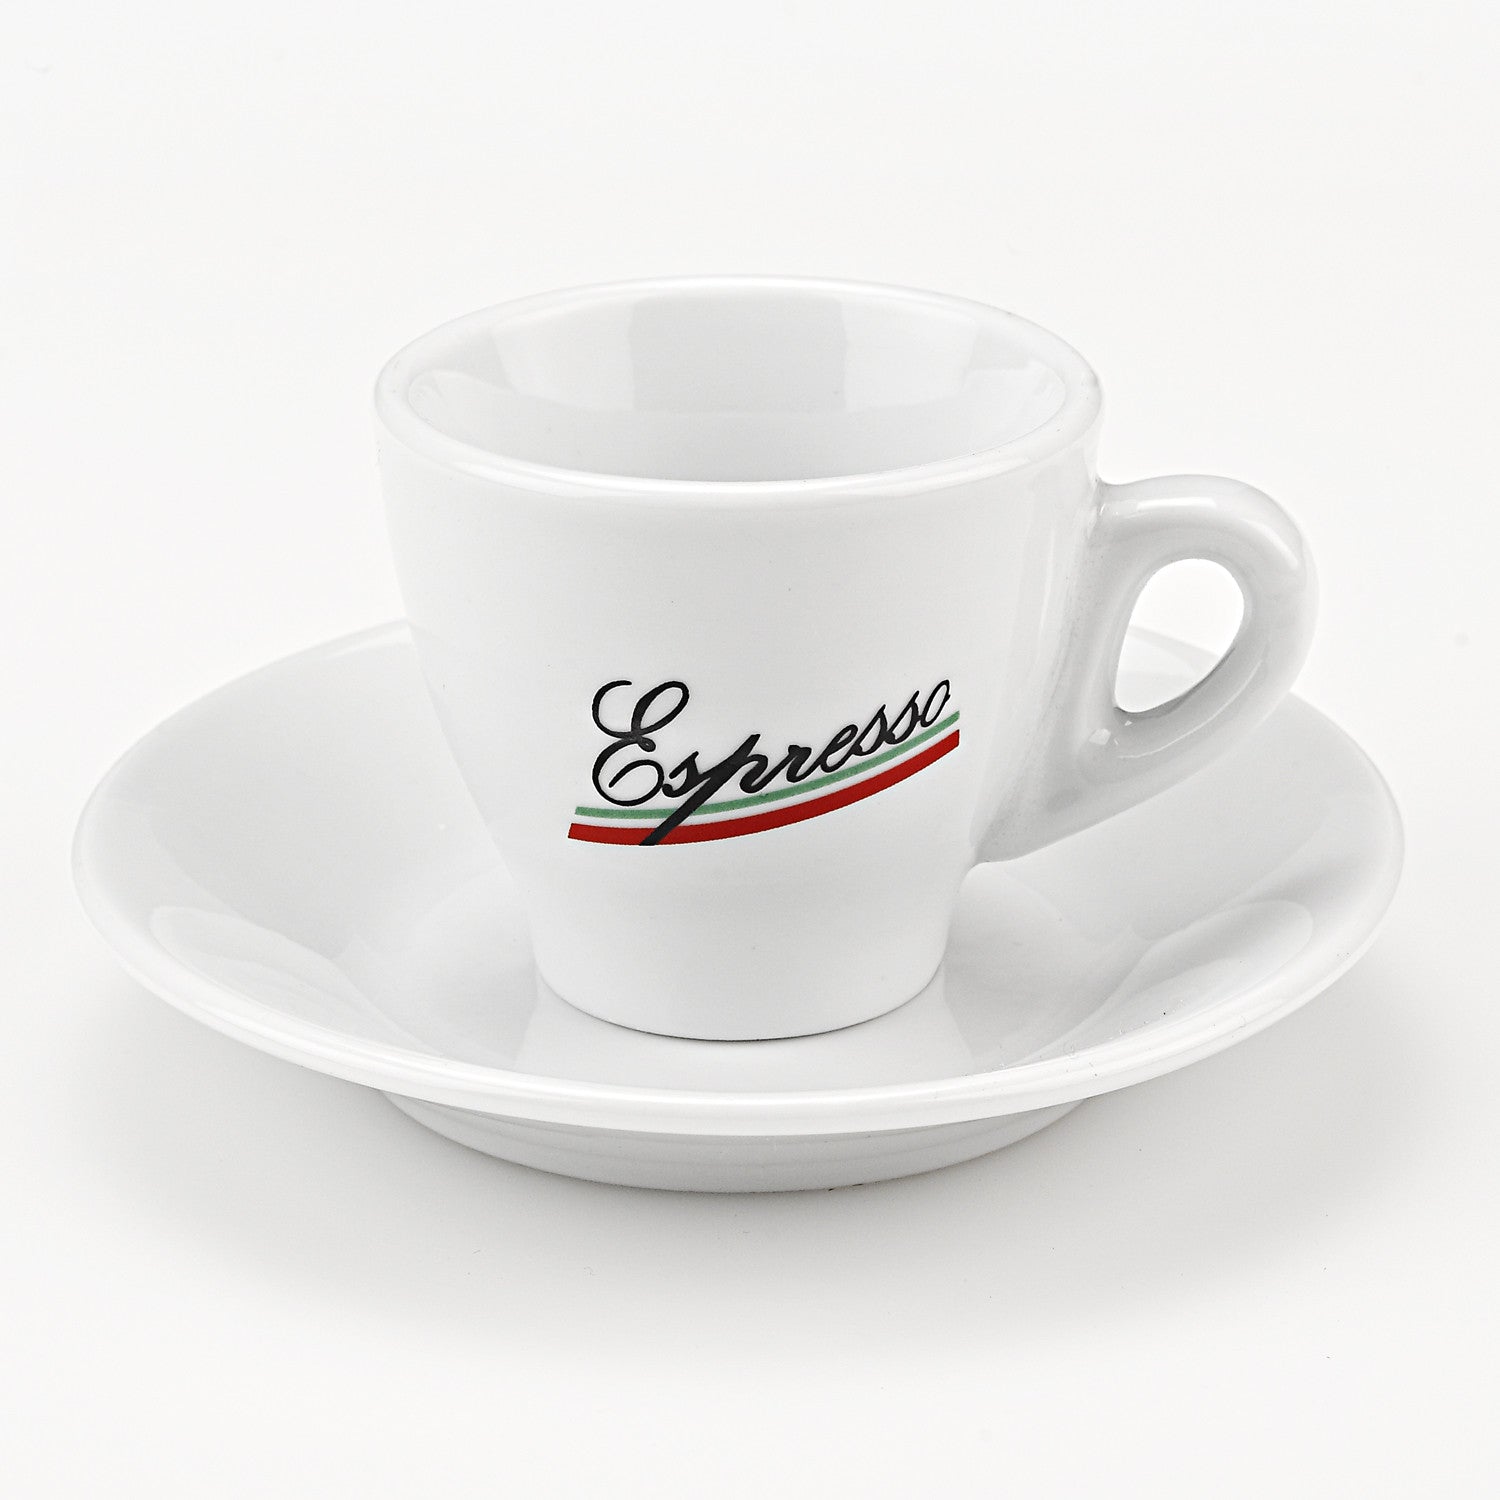 Six things to consider when choosing an espresso cup